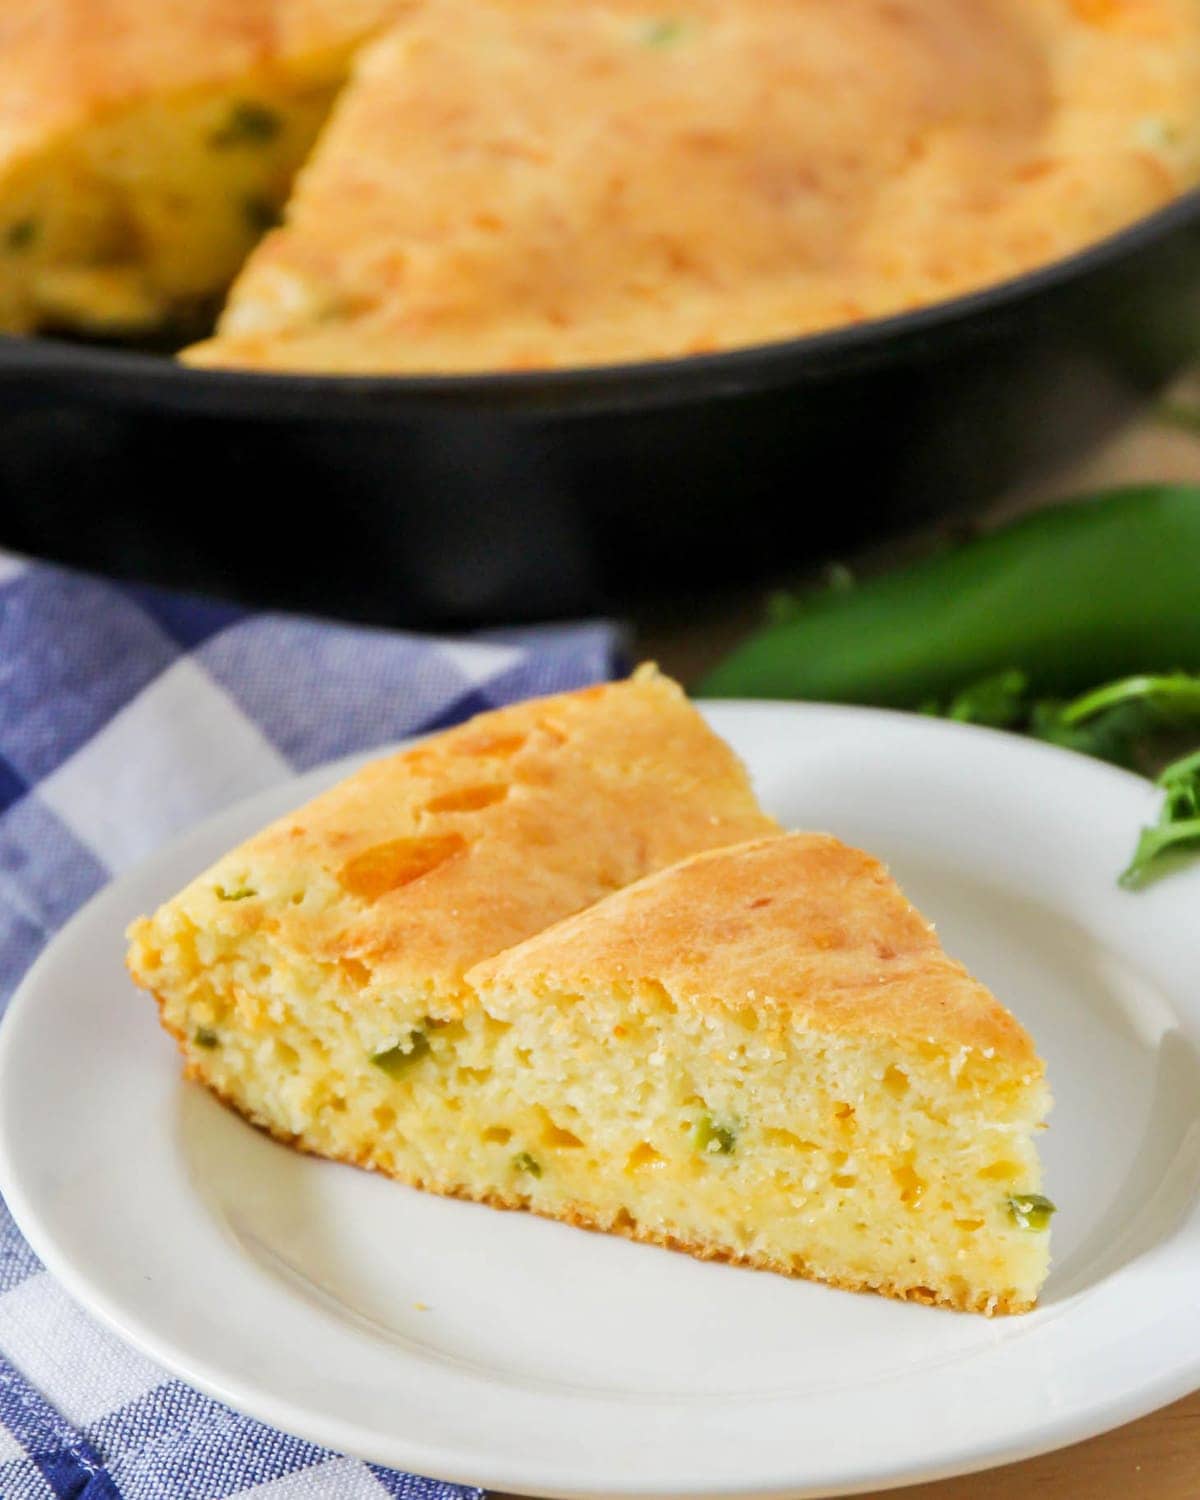 Slice of Mexican cornbread to serve with slow cooker chili.